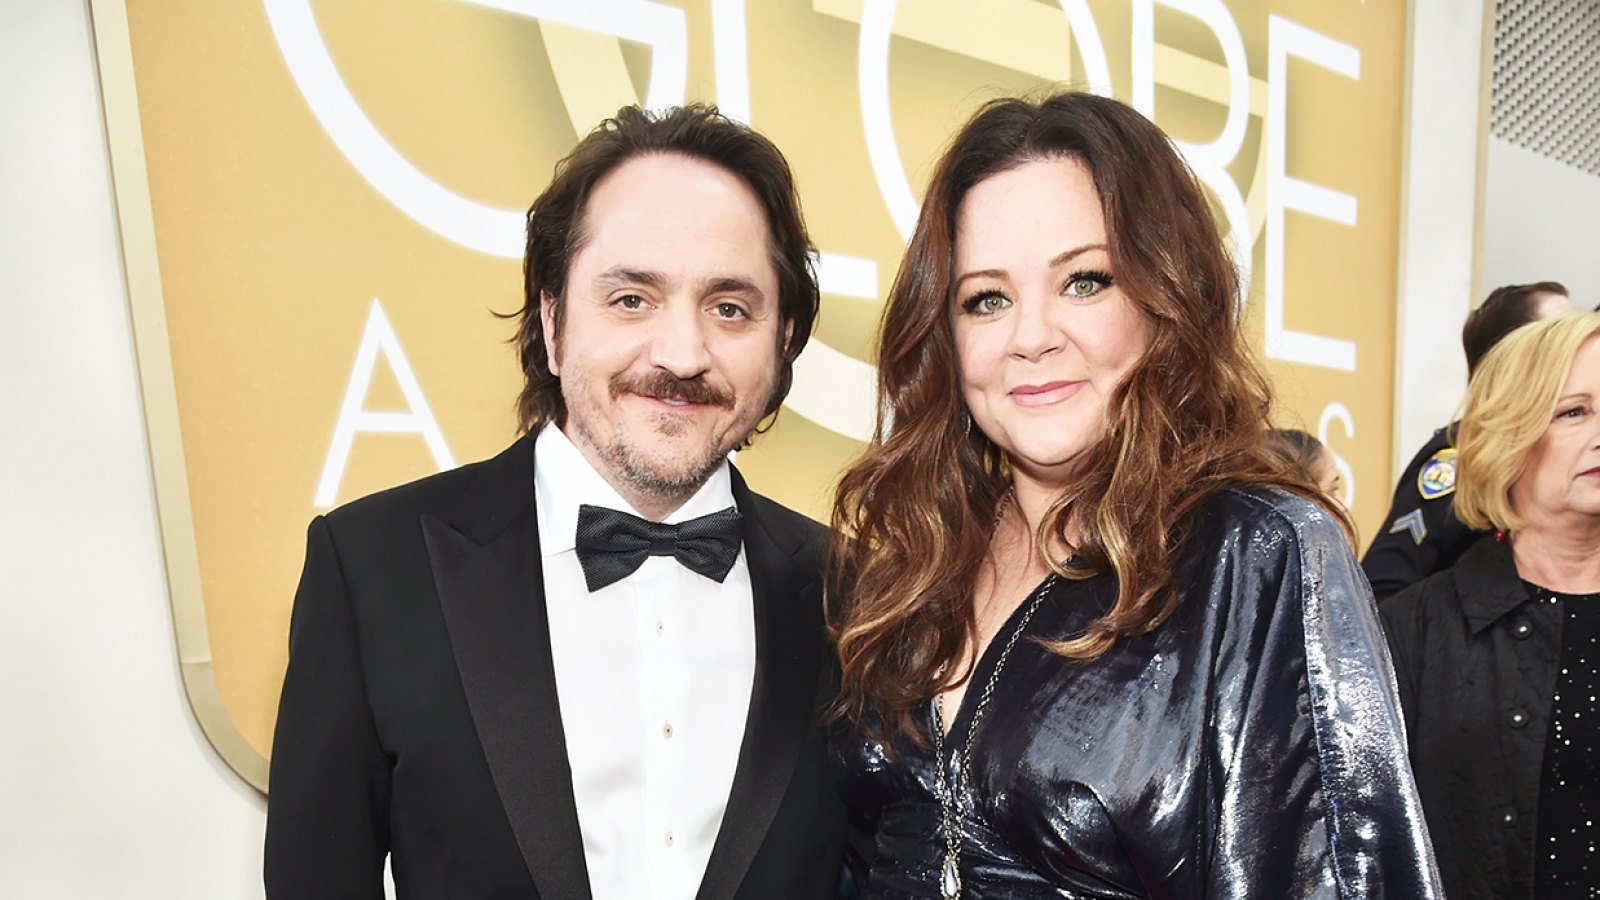 Ben Falcone and Melissa McCarthy at the Golden Globes 2016